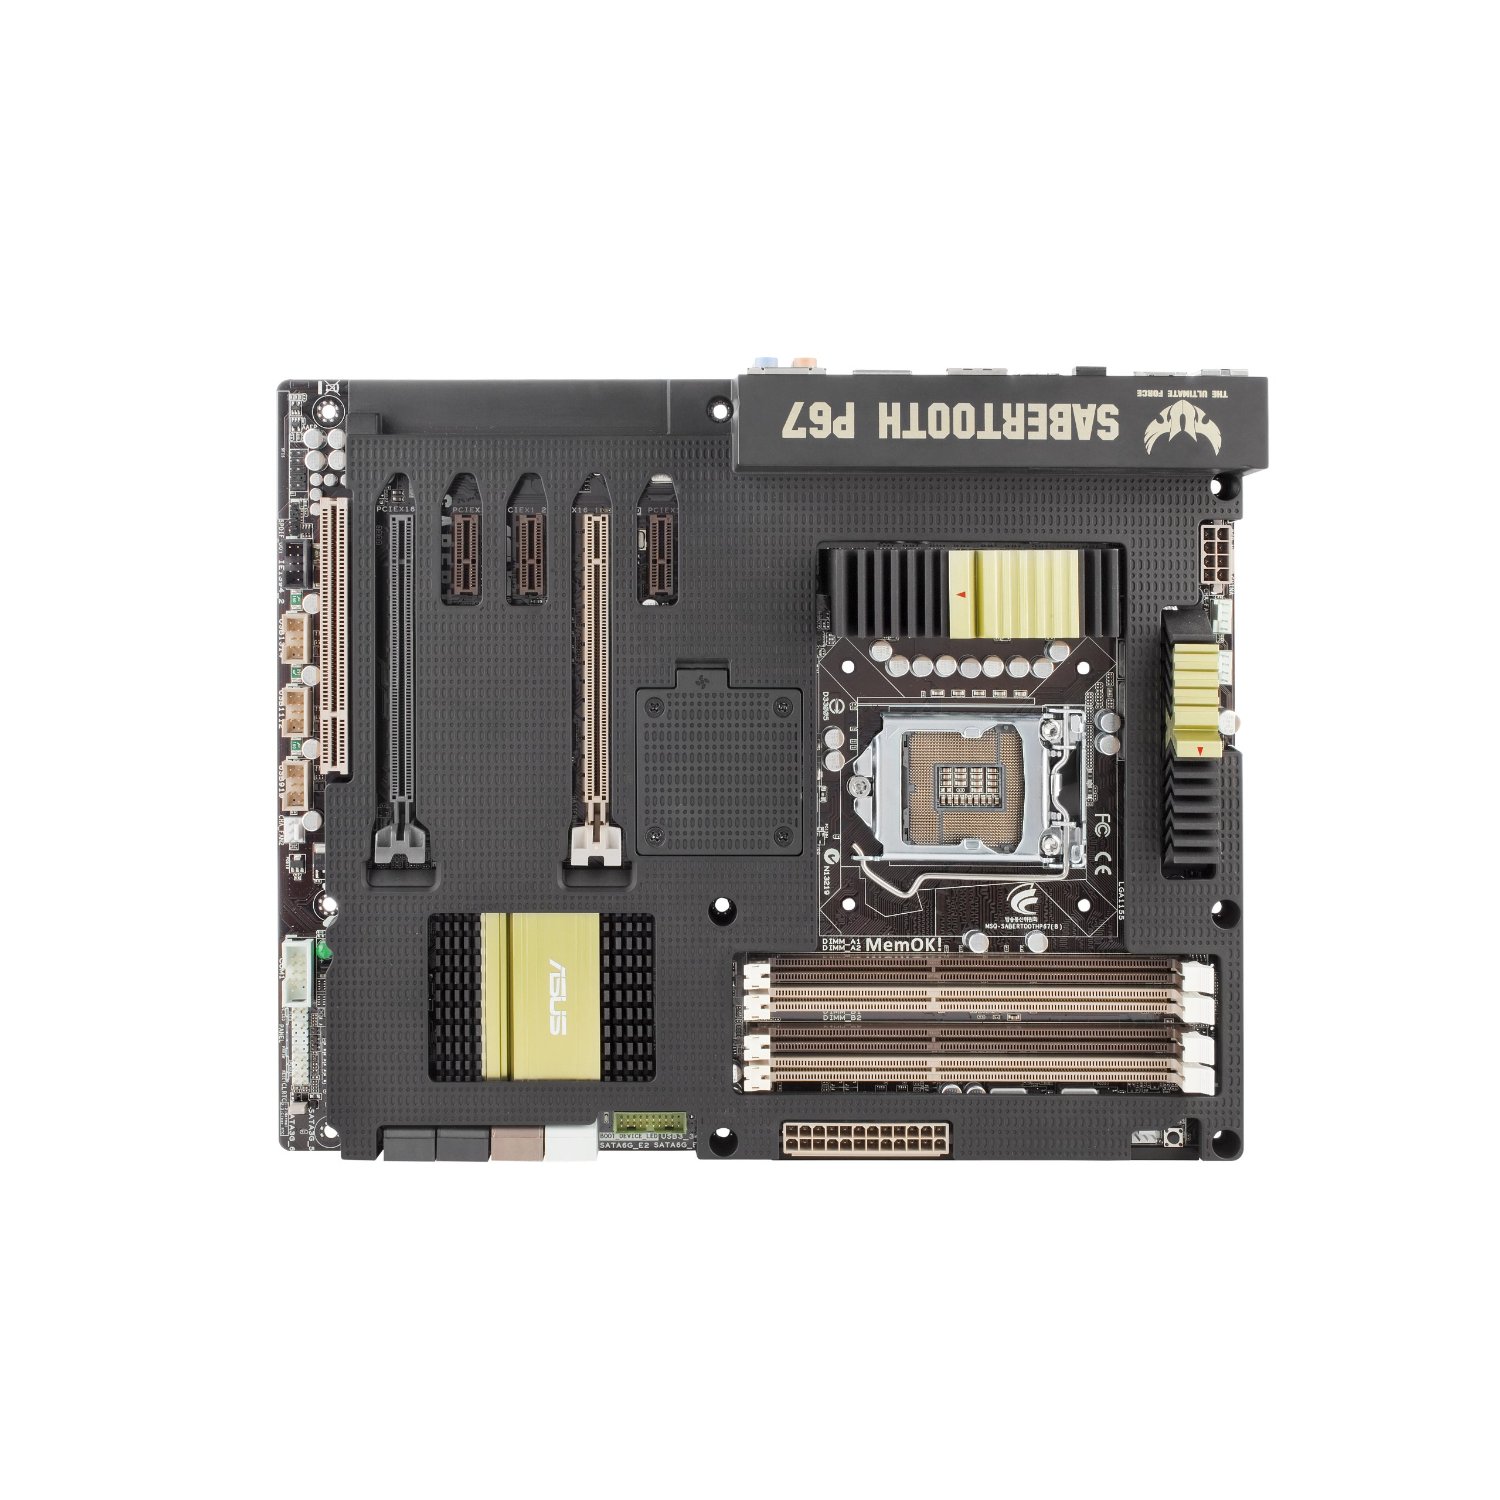 http://thetechjournal.com/wp-content/uploads/images/1108/1313504264-asus-sabertooth-p67-lga-1155-sata-6gbps-and-usb-30-supported-1800-atx-motherboard-2.jpg